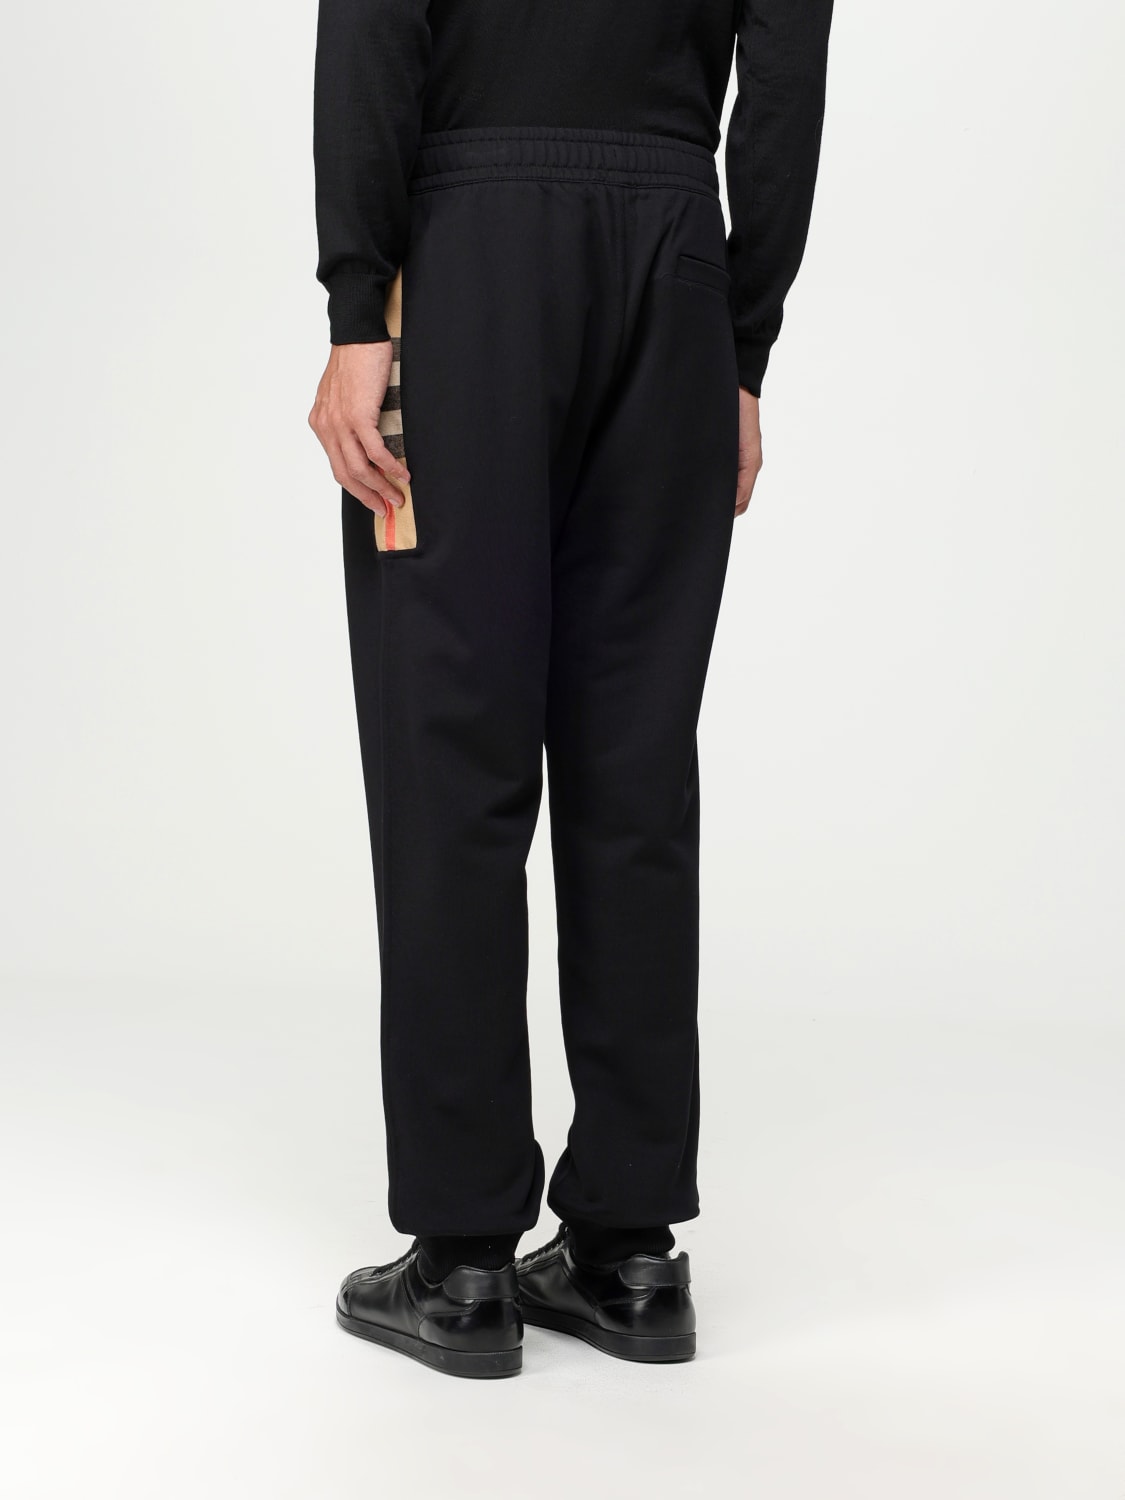 BURBERRY: men's pants - Black | Burberry pants 8059066 online at GIGLIO.COM